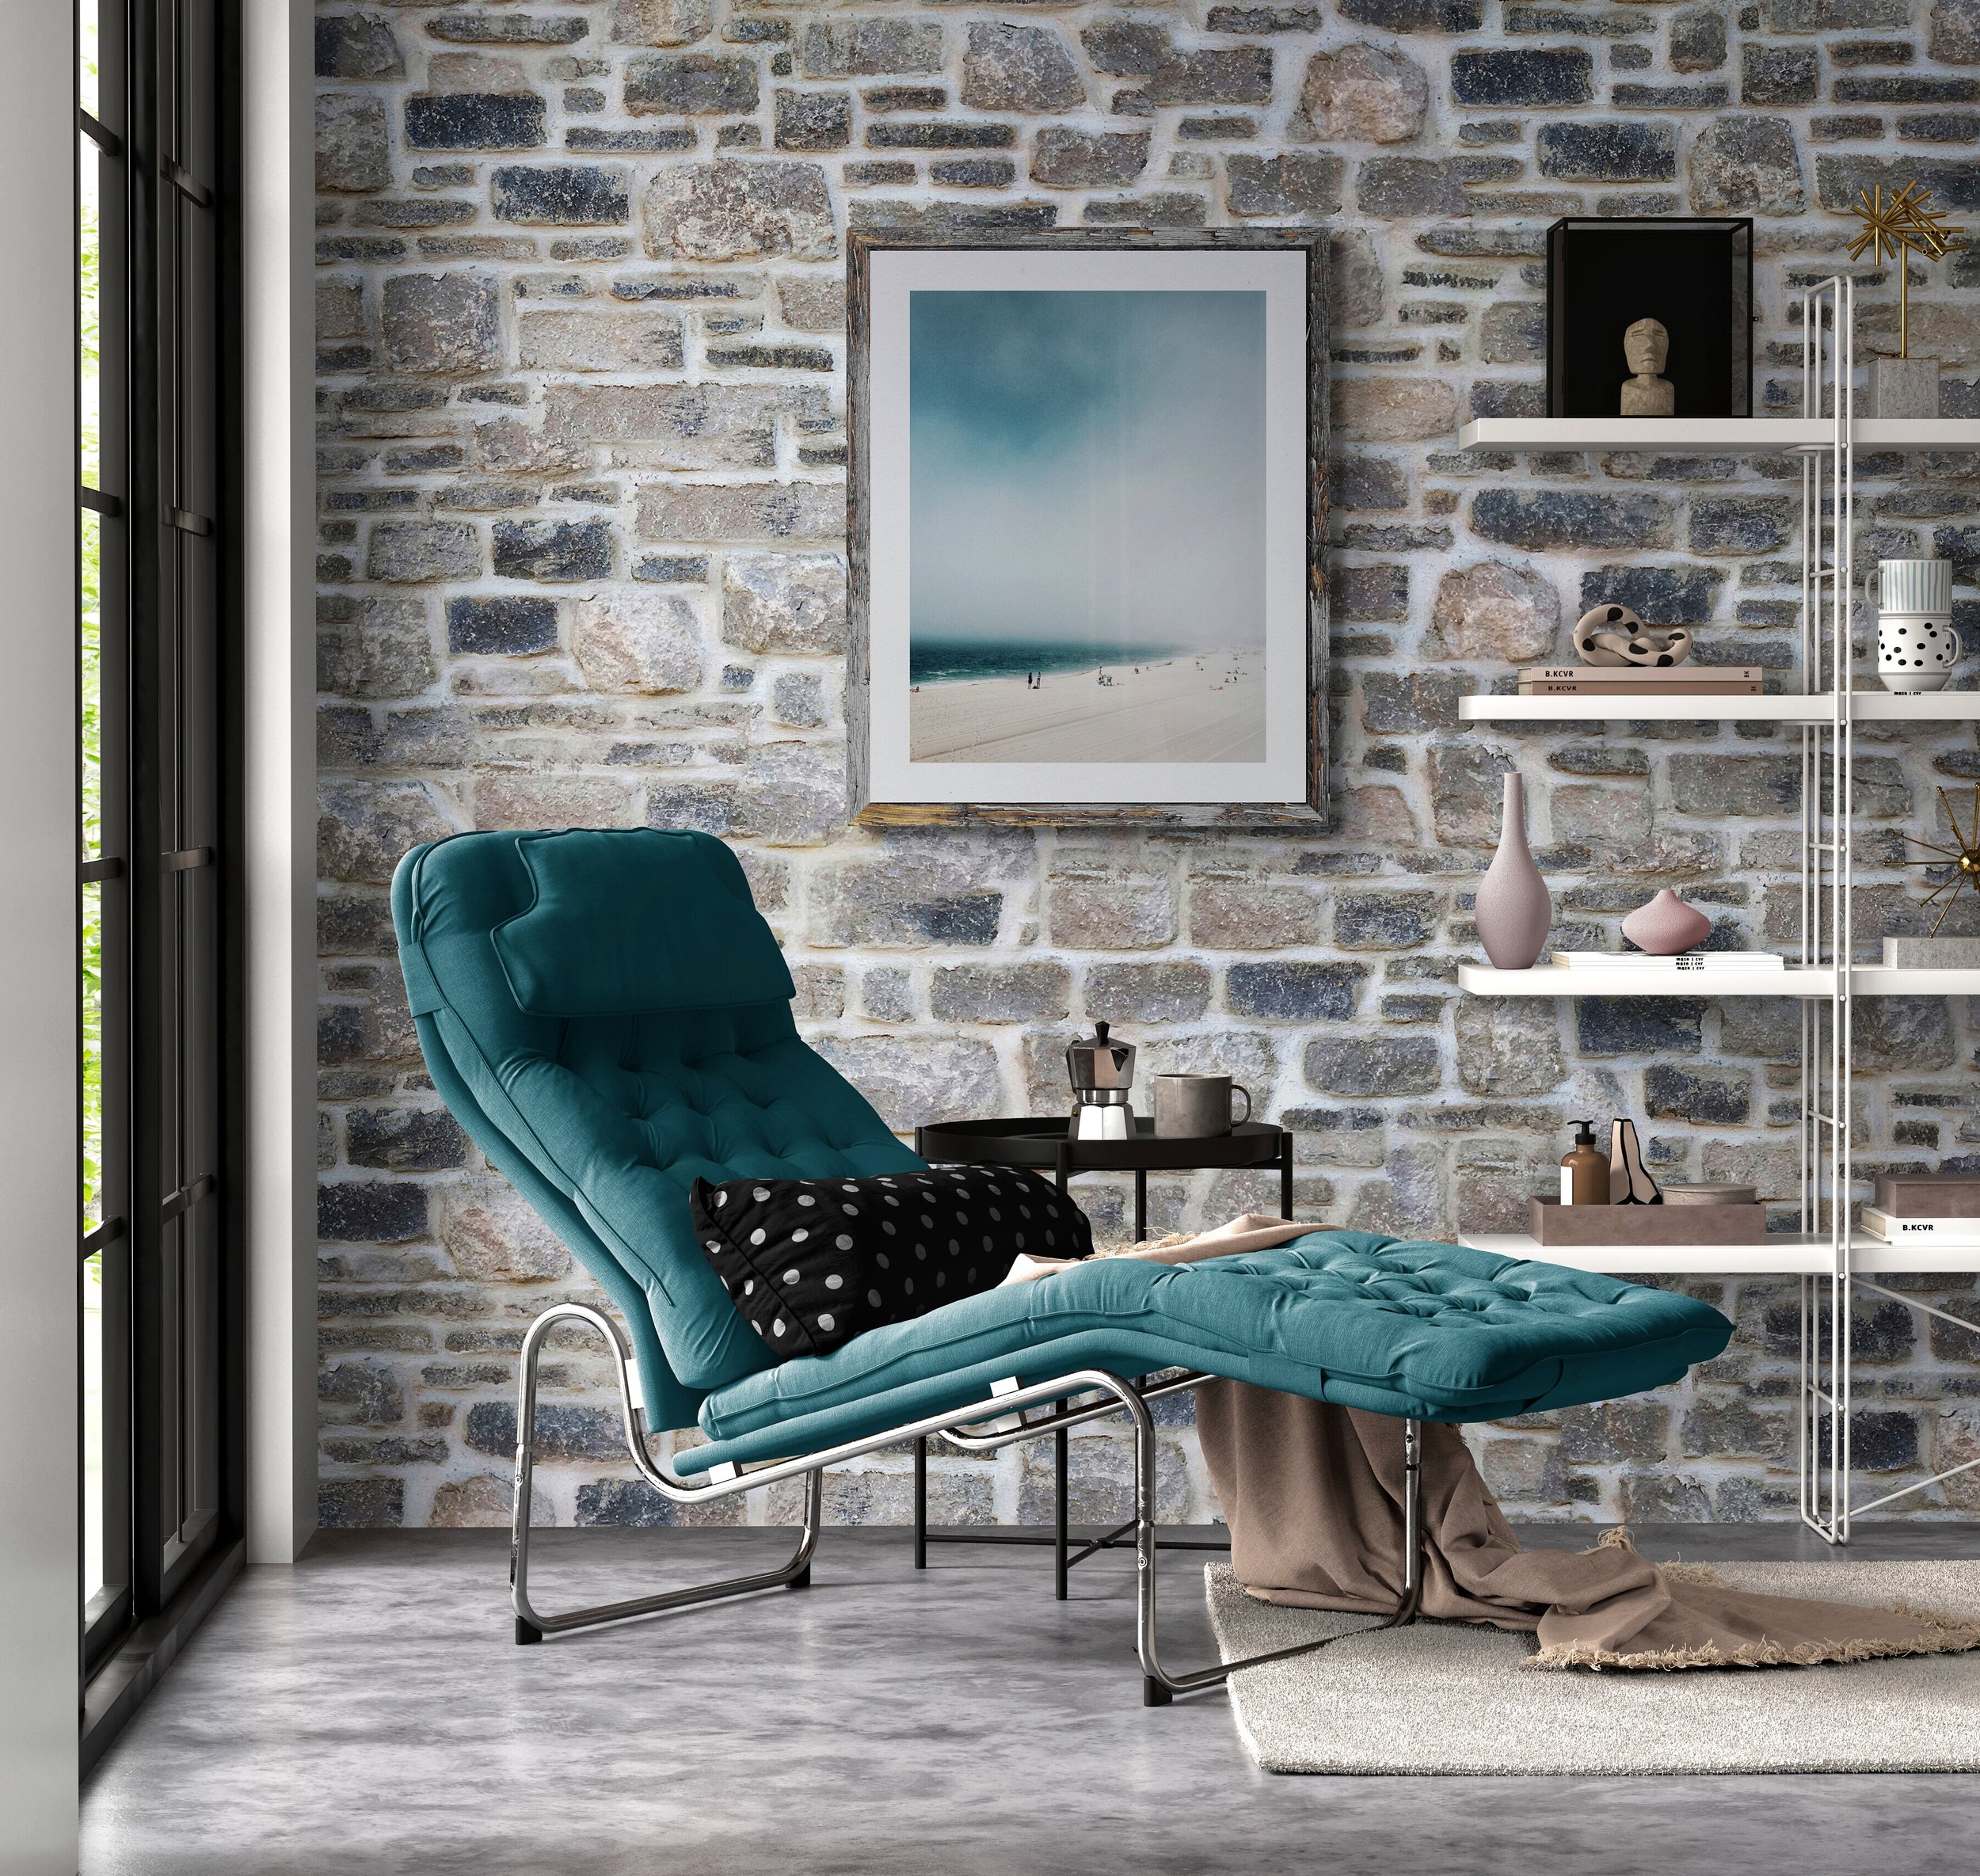 EDITED_Chaise_lounger_in_modern_living_room-01.jpeg